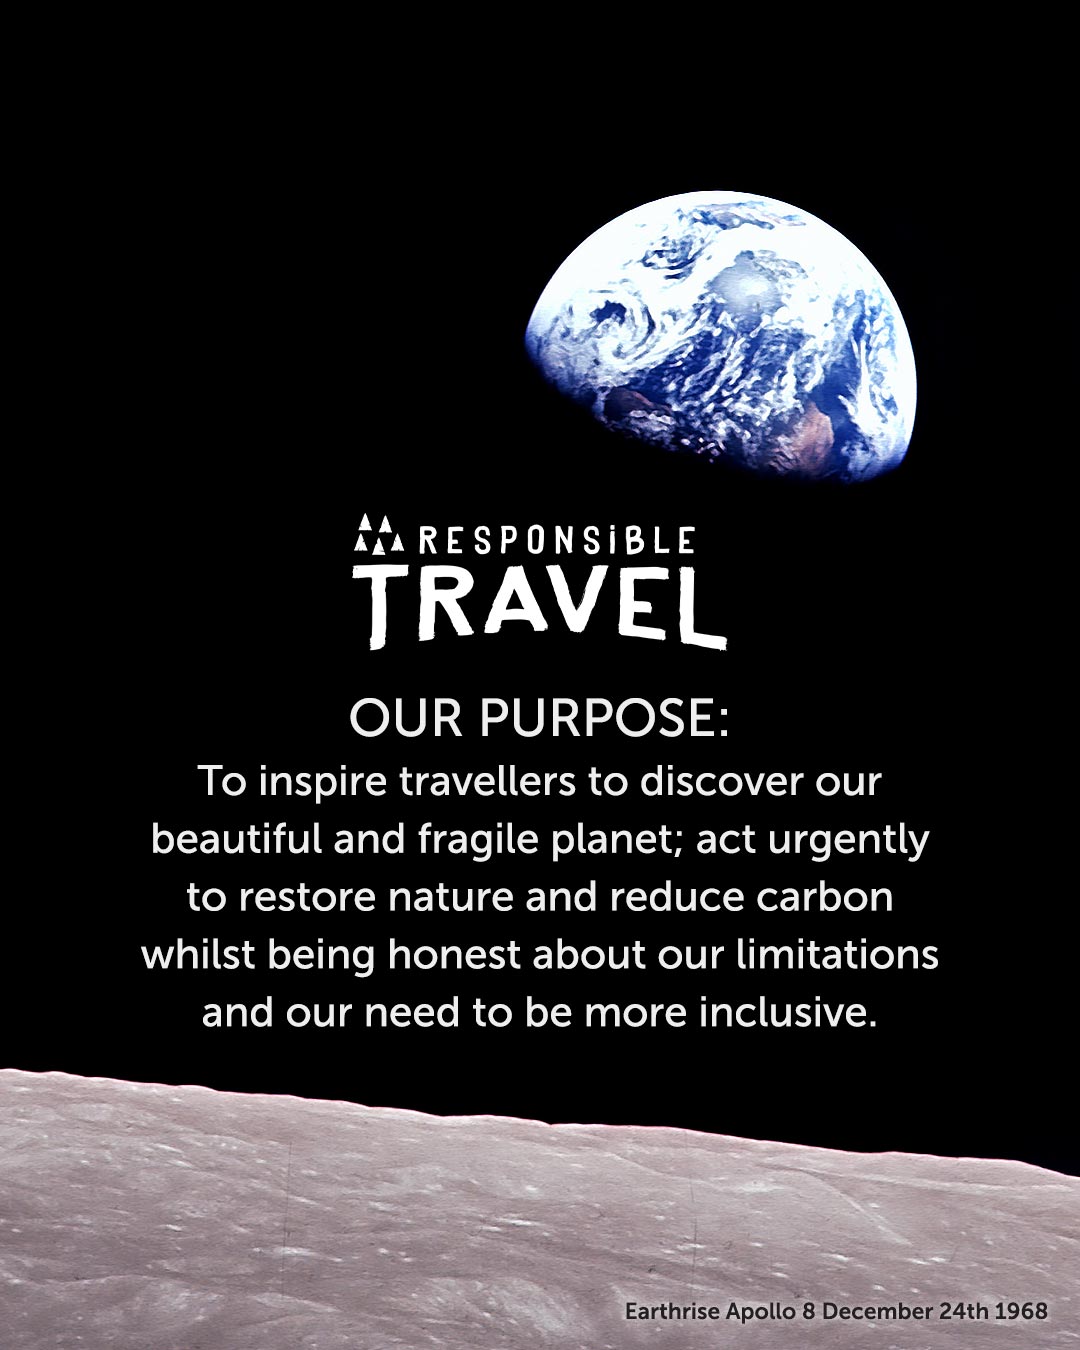 Quote - Our purpose: To inspire travellers to discover our beautiful and fragile planet; act urgently to restore nature and reduce carbon whilst being honest about our limitations and our need to be more inclusive.